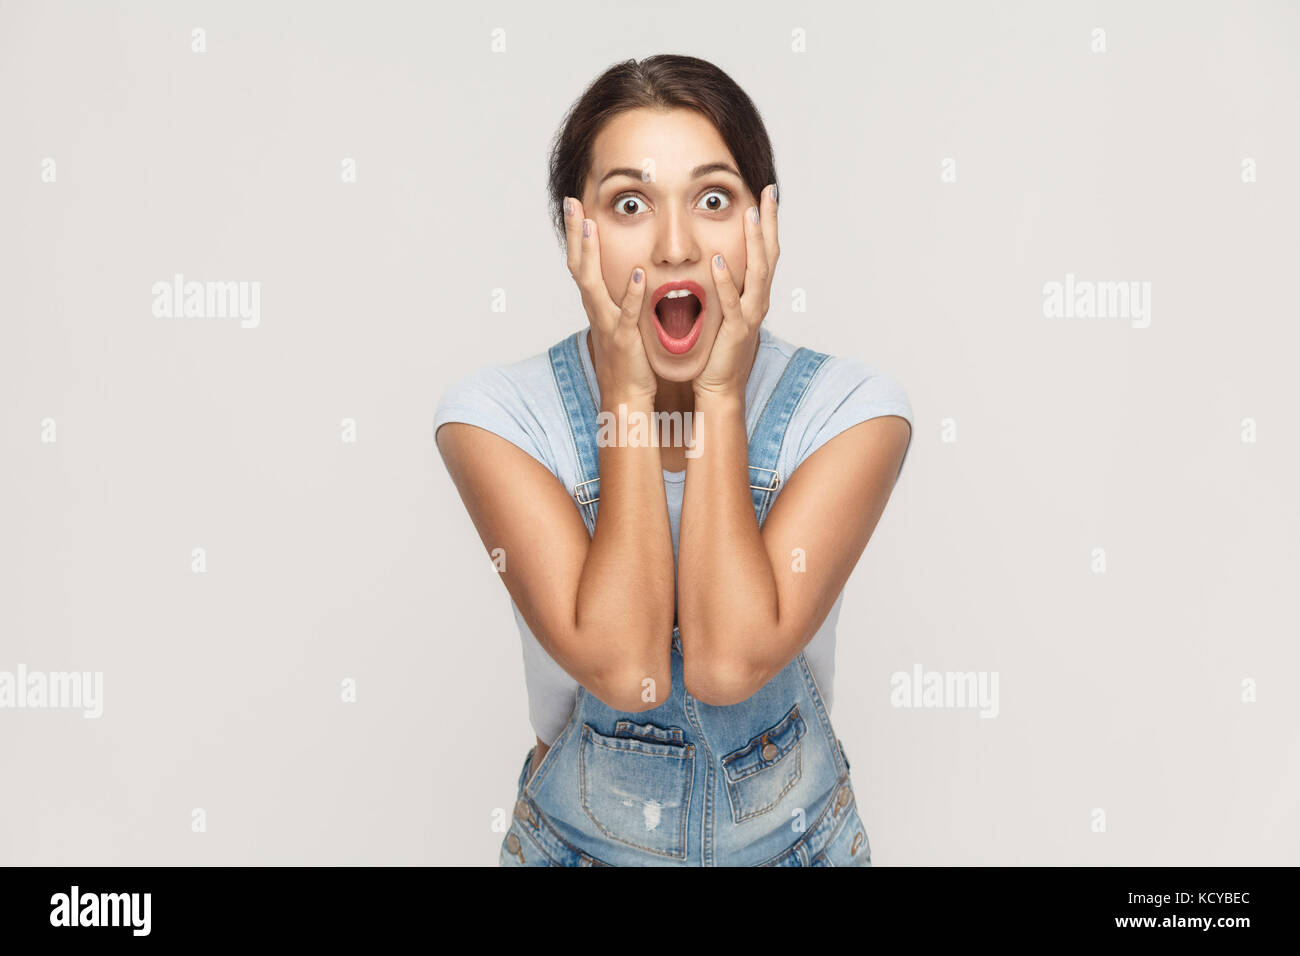 Human face expressions and emotions. Arab young adult woman holding arms on her cheeks and shocked. Isolated on gray background, studio shot Stock Photo